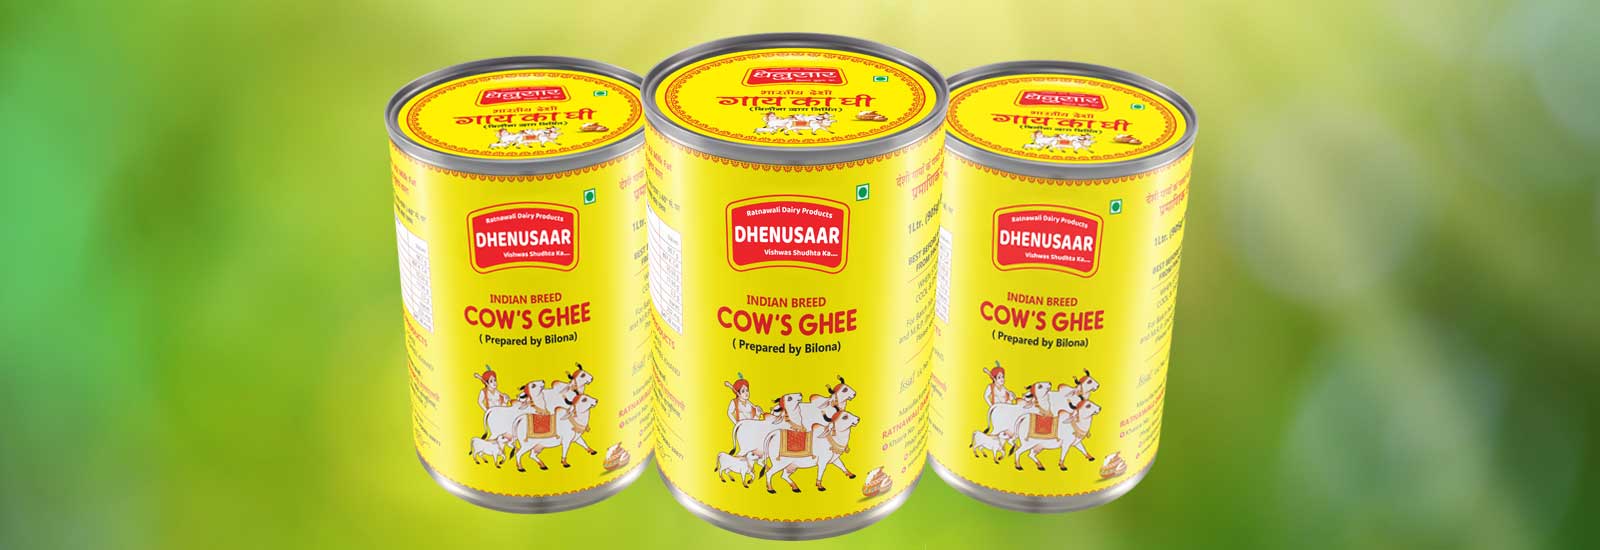 Indian Breed Cow's Ghee